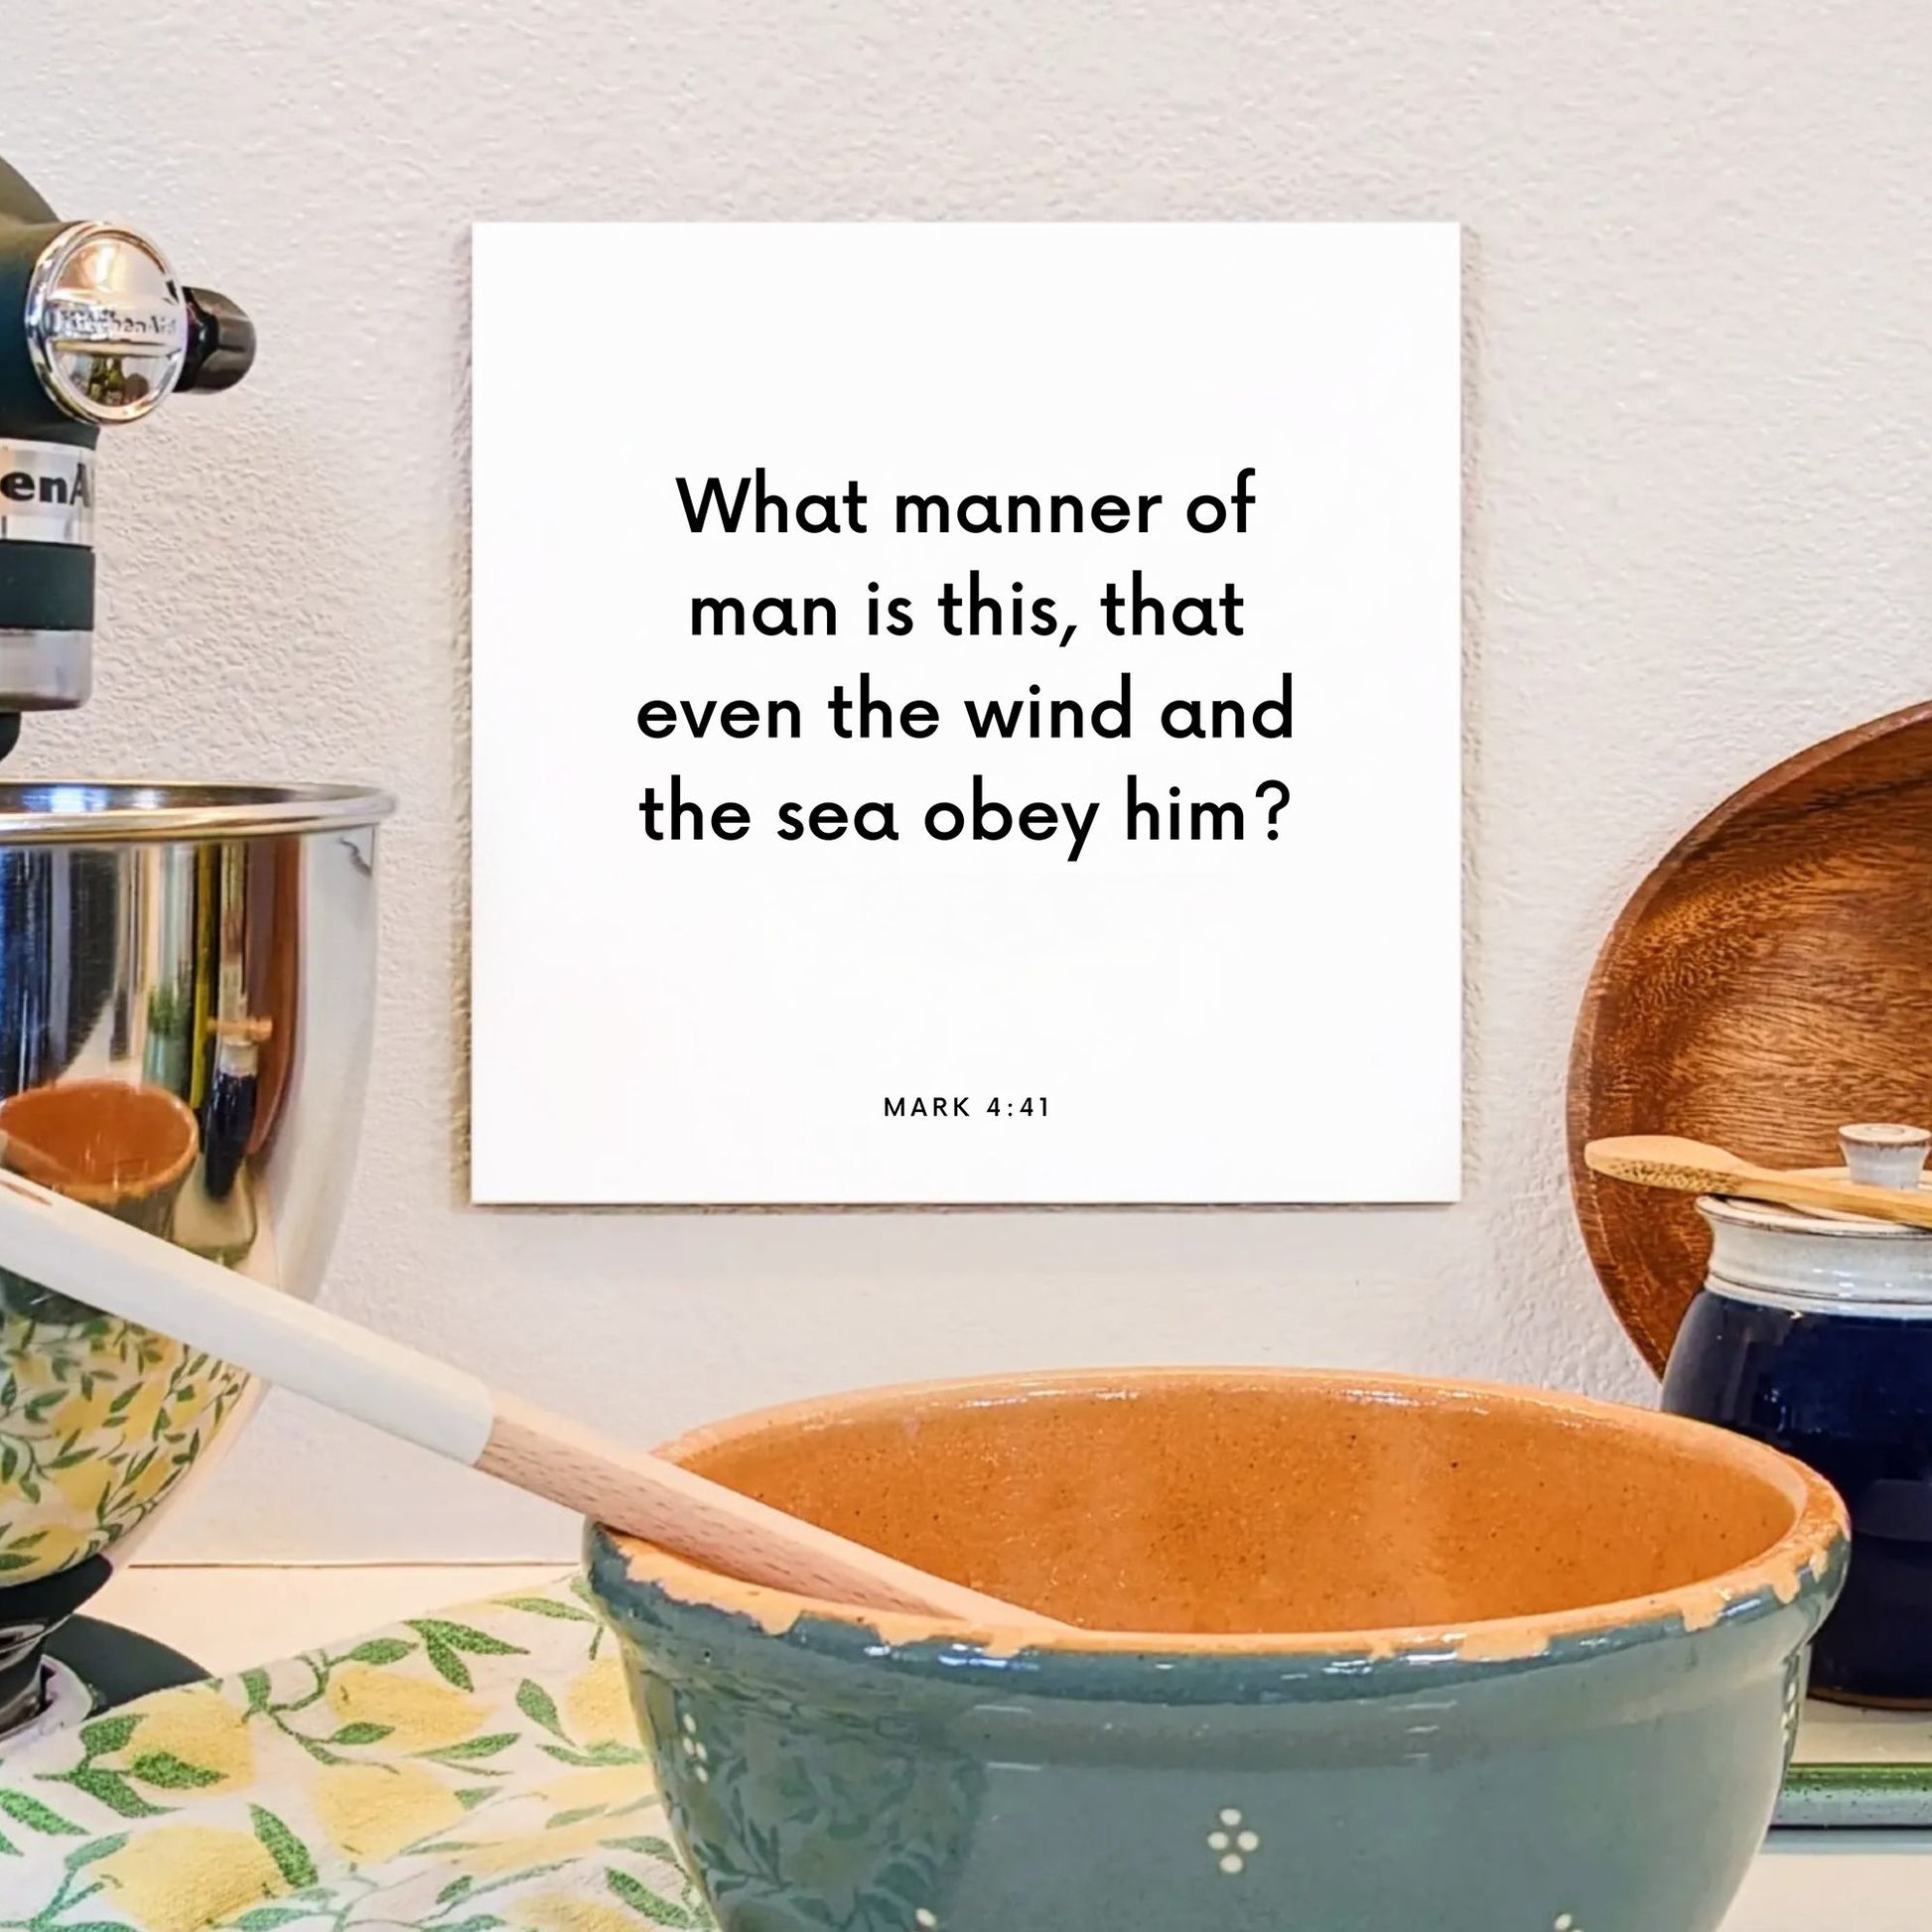 Kitchen mouting of the scripture tile for Mark 4:41 - "What manner of man is this?"